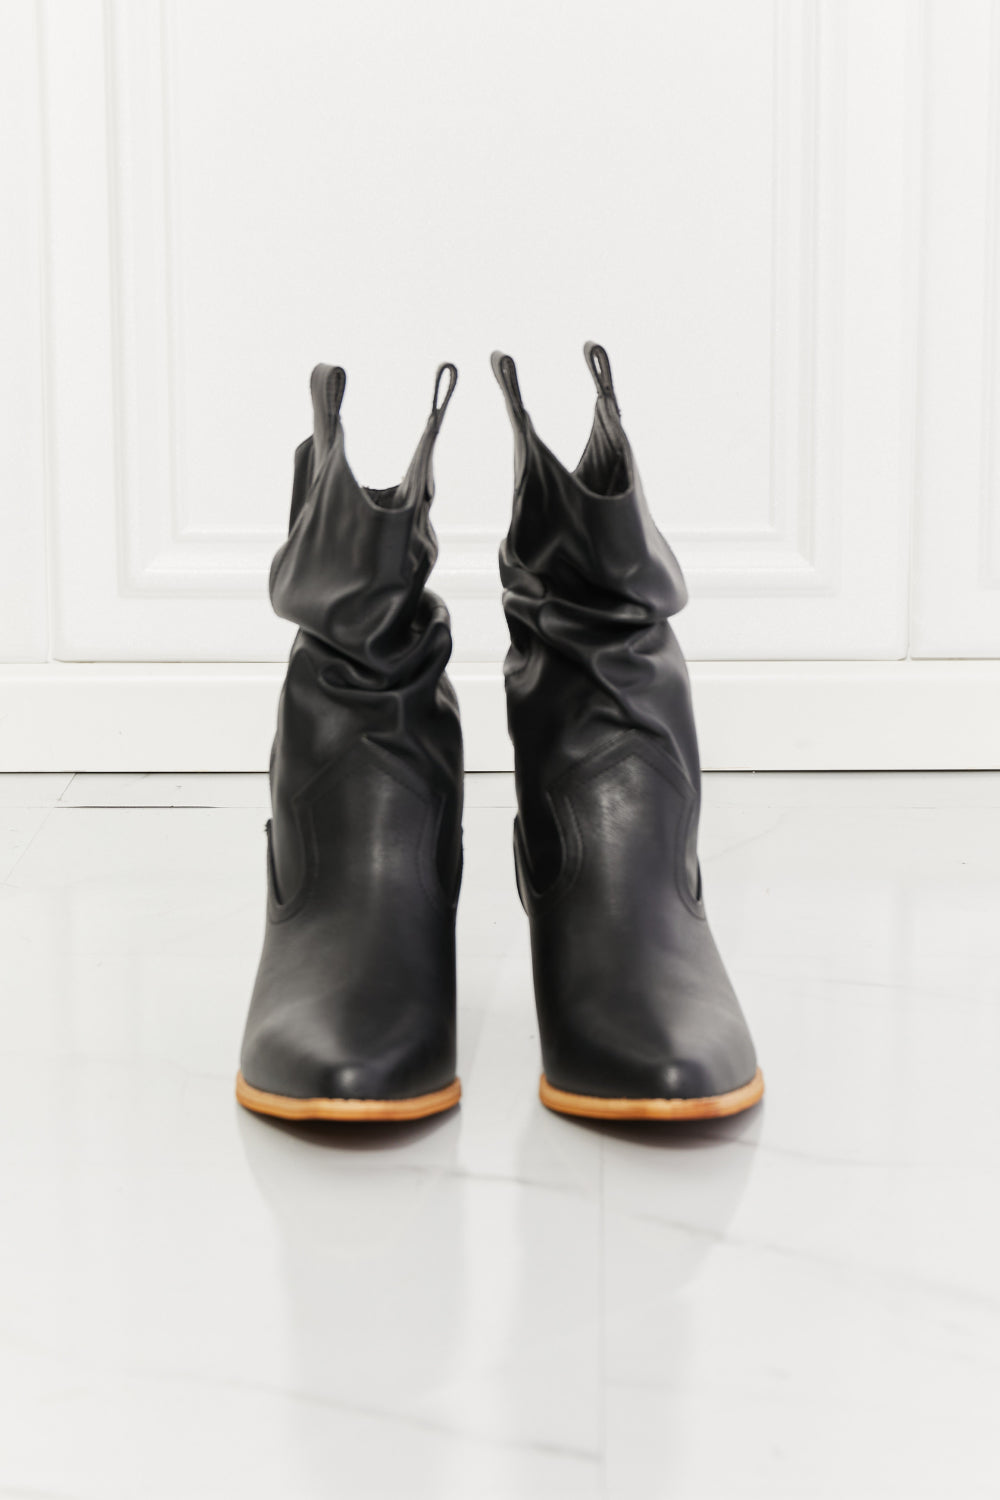 MMShoes Better in Texas Scrunch Cowboy Boots in Black - Cheeky Chic Boutique